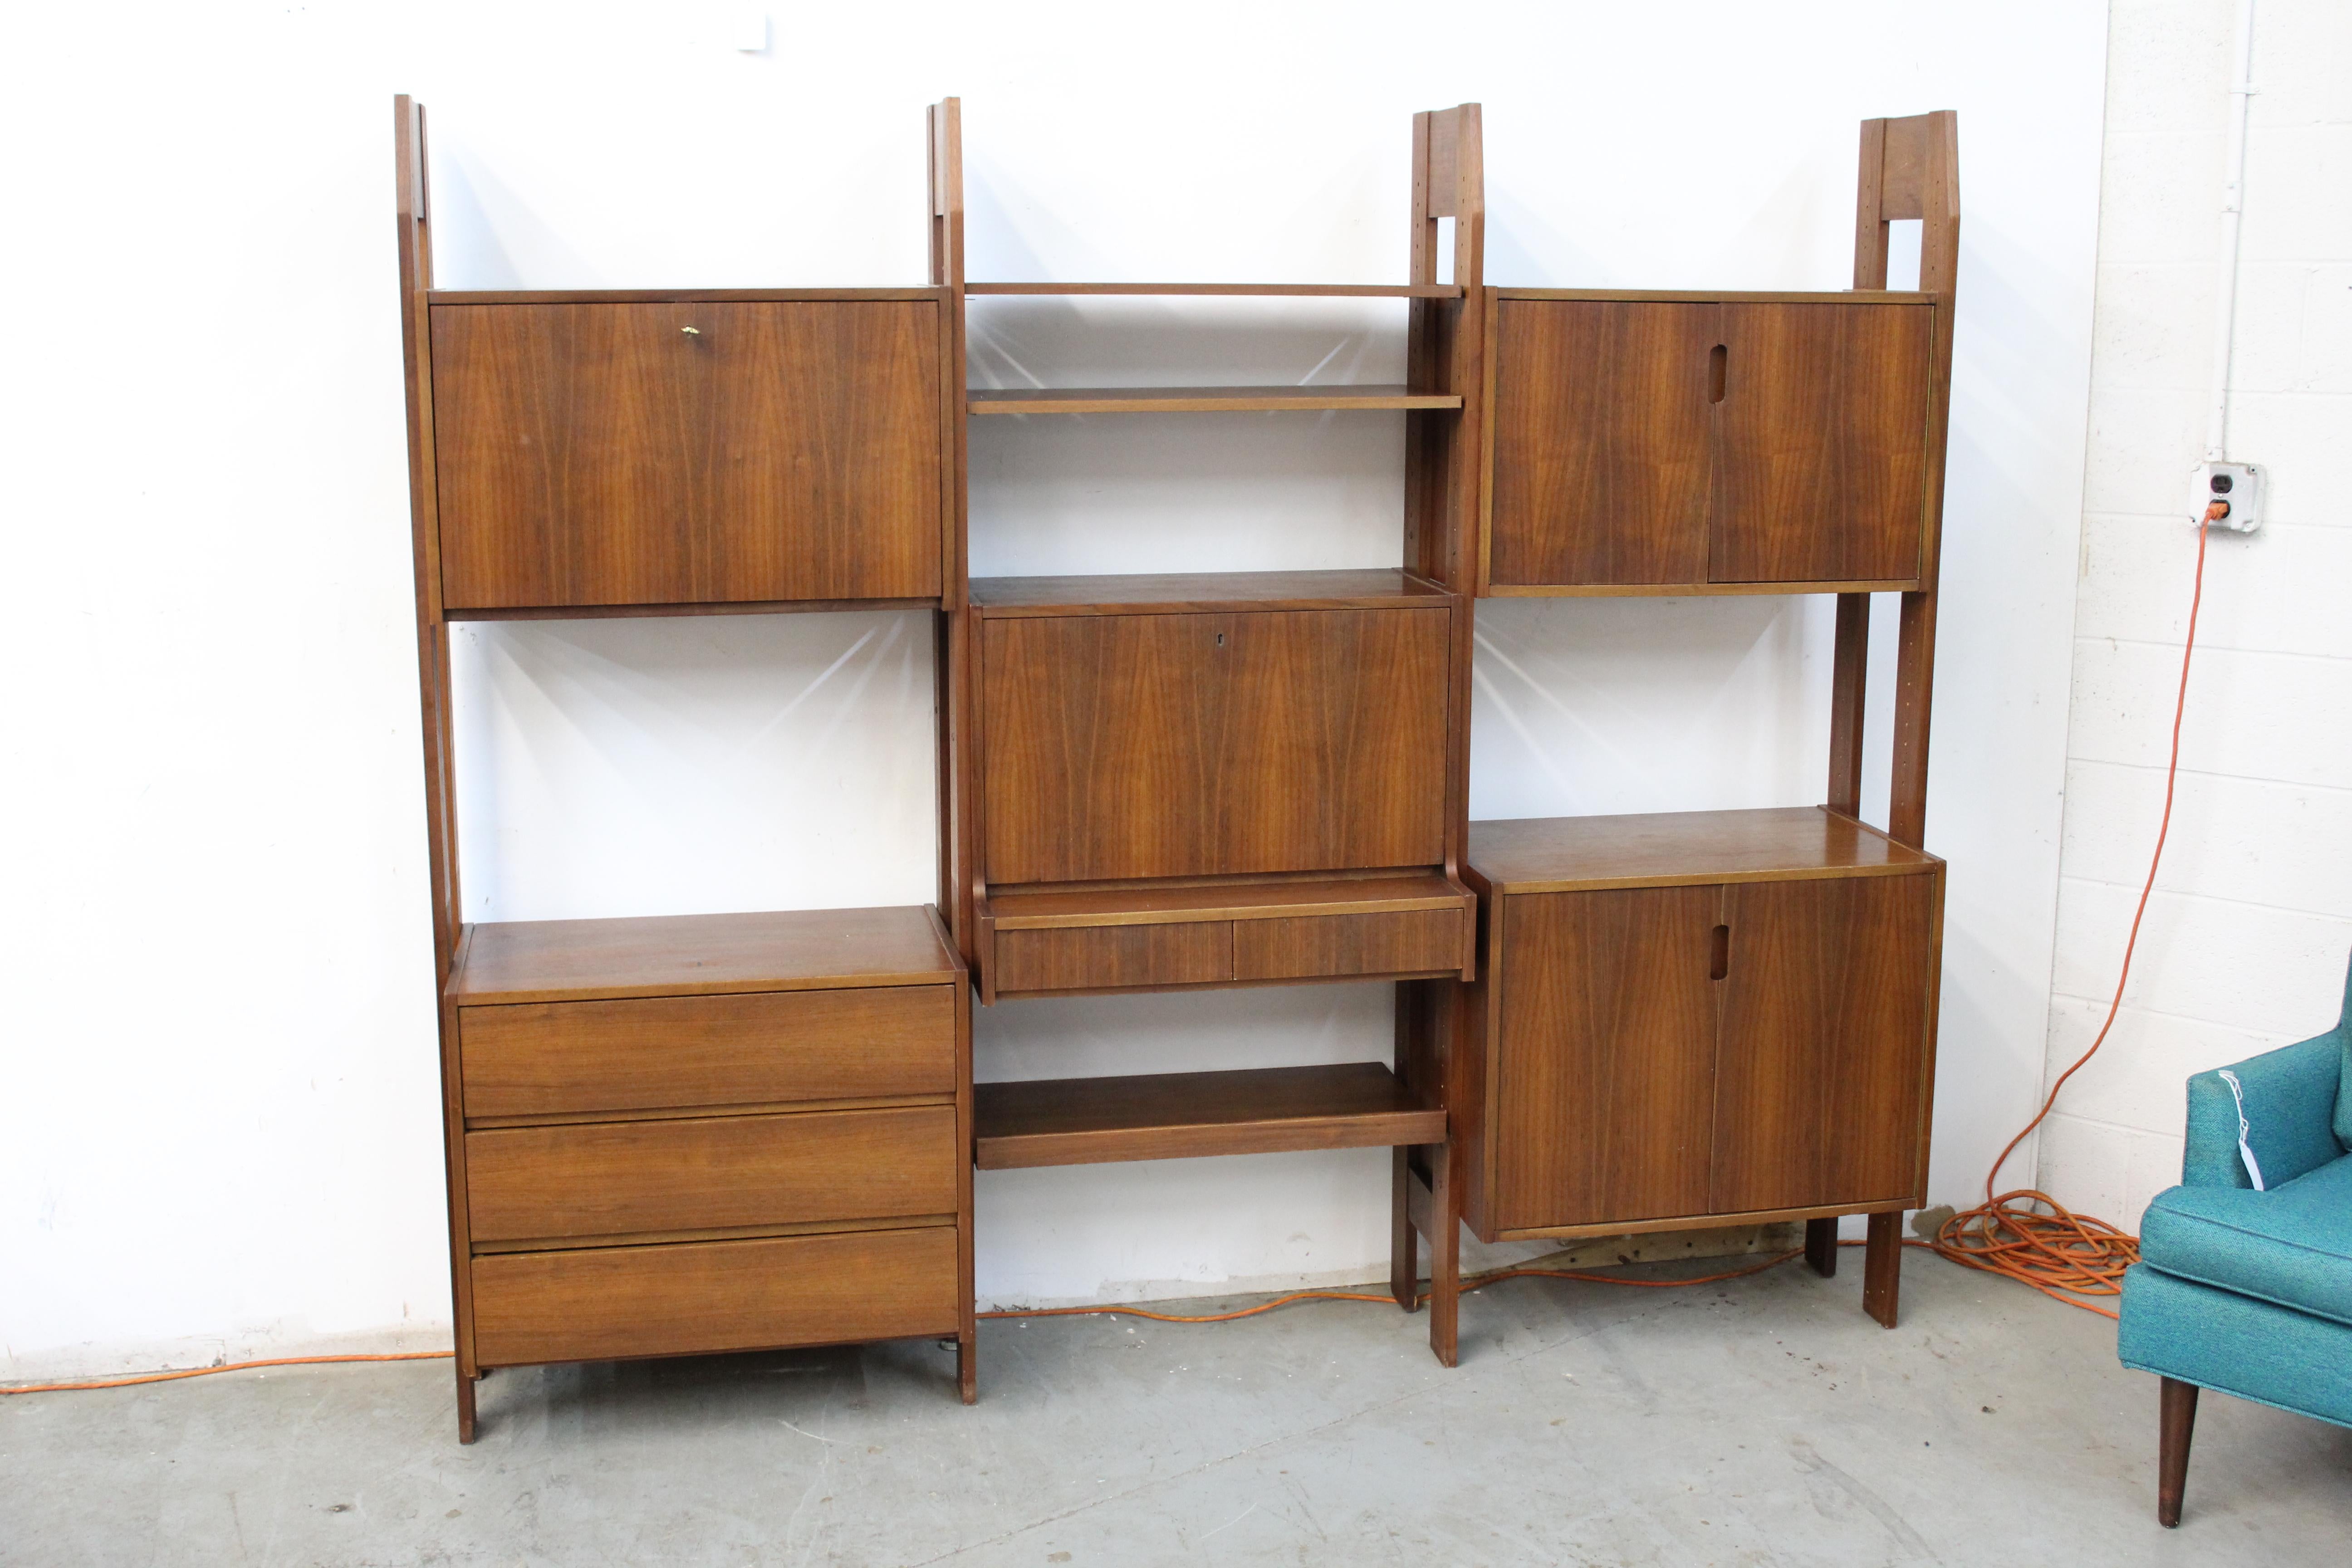 Mid-Century Danish Modern Teak Wall Unit System
Offered is a beautiful Danish Modern teak wall unit. This wall unit is slightly unique in that it is free standing and requires no wall mounts or attachments.  It features three sections of drawers and